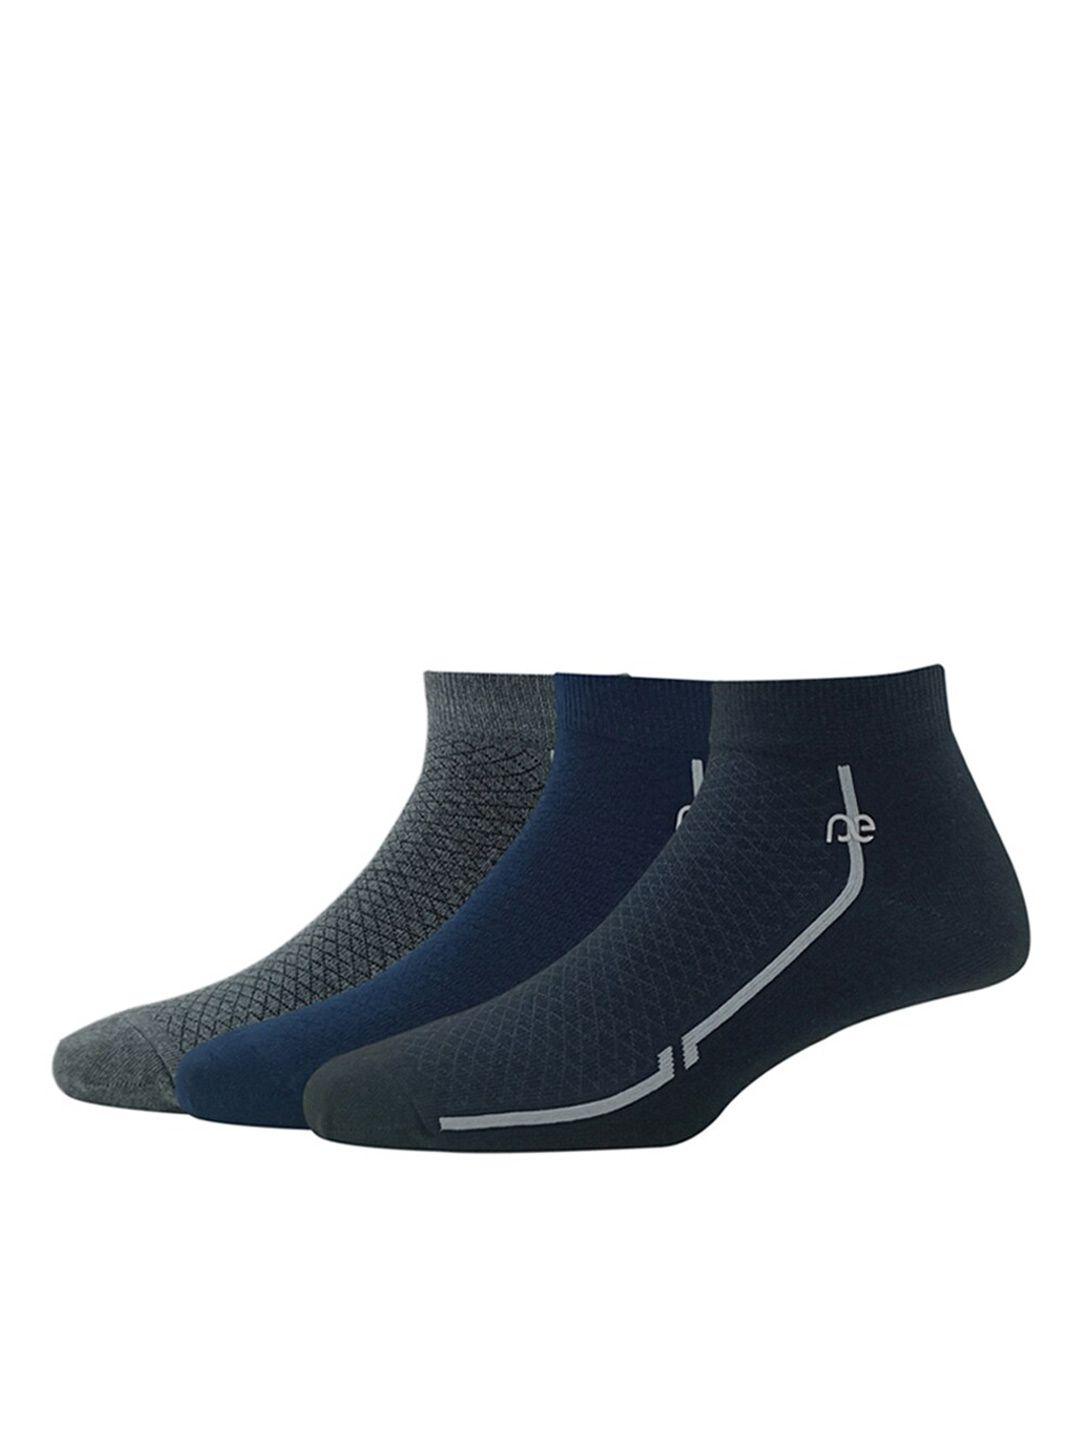 peter-england-pack-of-3-patterned-cotton-ankle-length-socks